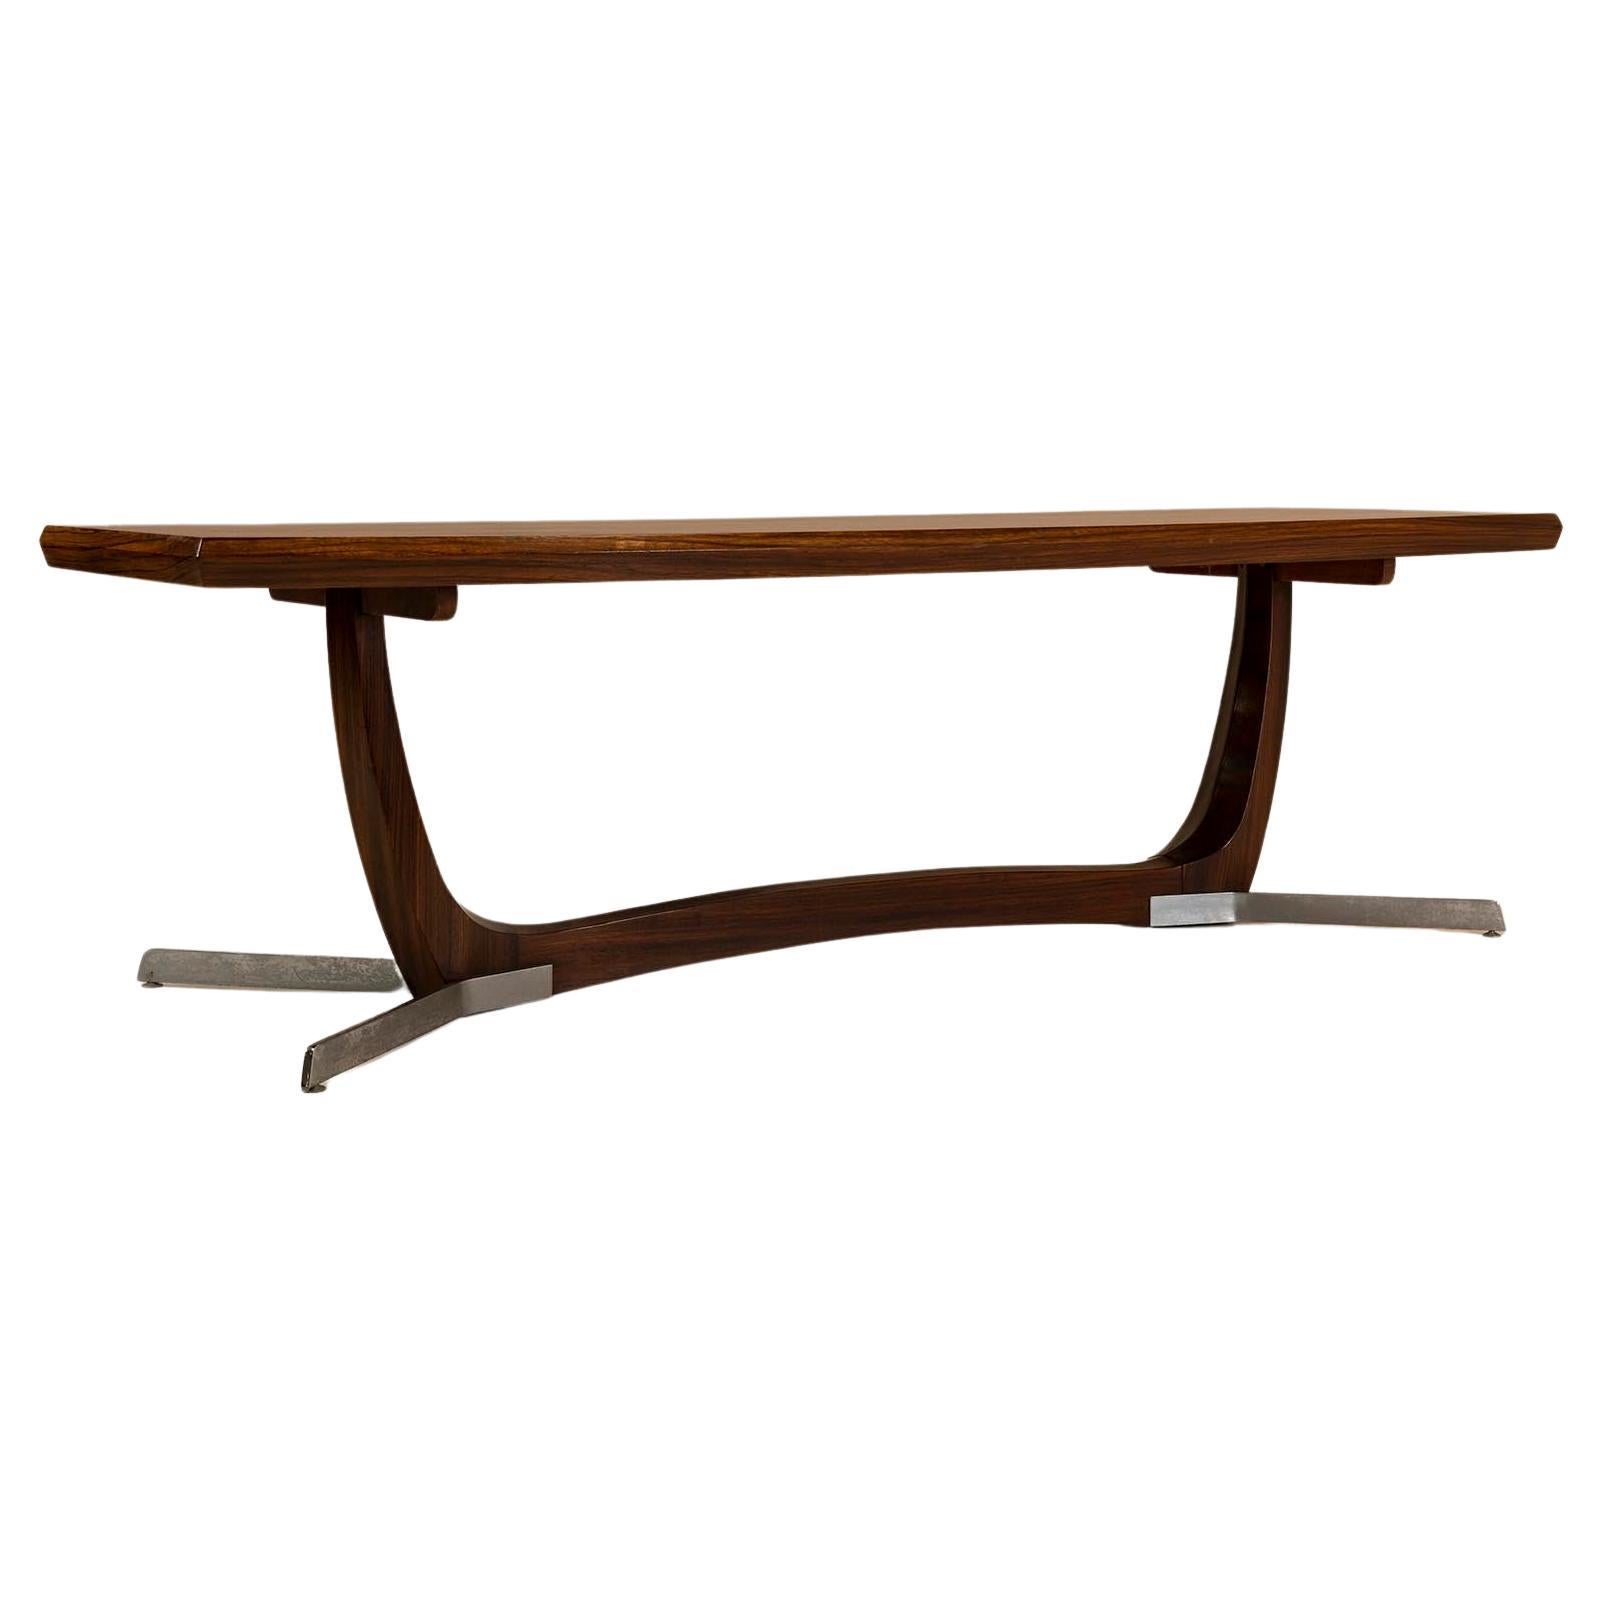 Architectural Large Coffee Table in Rosewood Veneer and Metal, 1960s